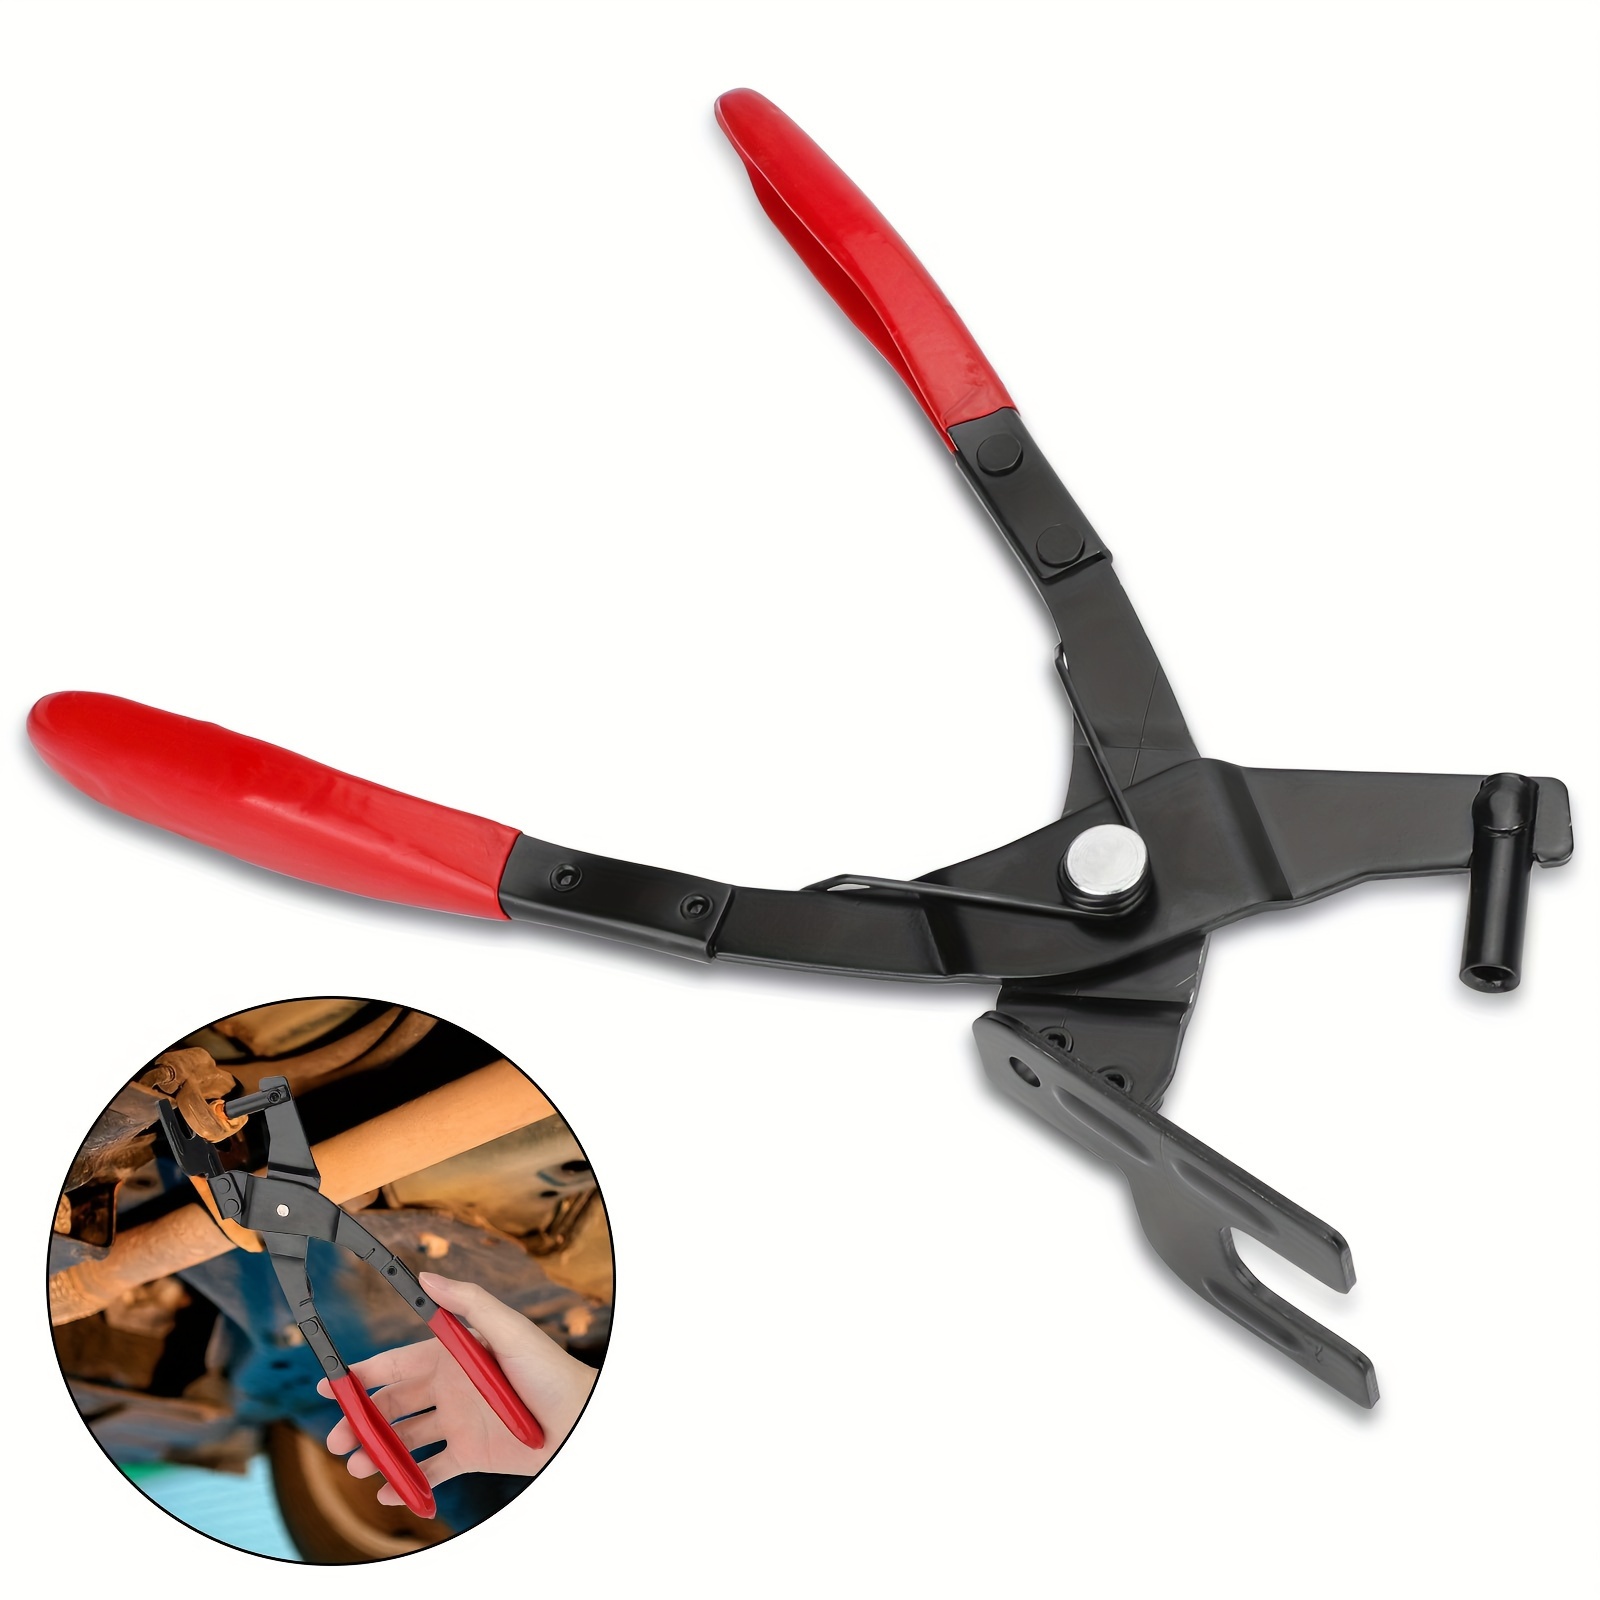 

Universal Car Exhaust Hanger Removal Plier, Car Exhaust Muffler Rubber Pad Plier Puller Hanger Disassembly Grommets Tool